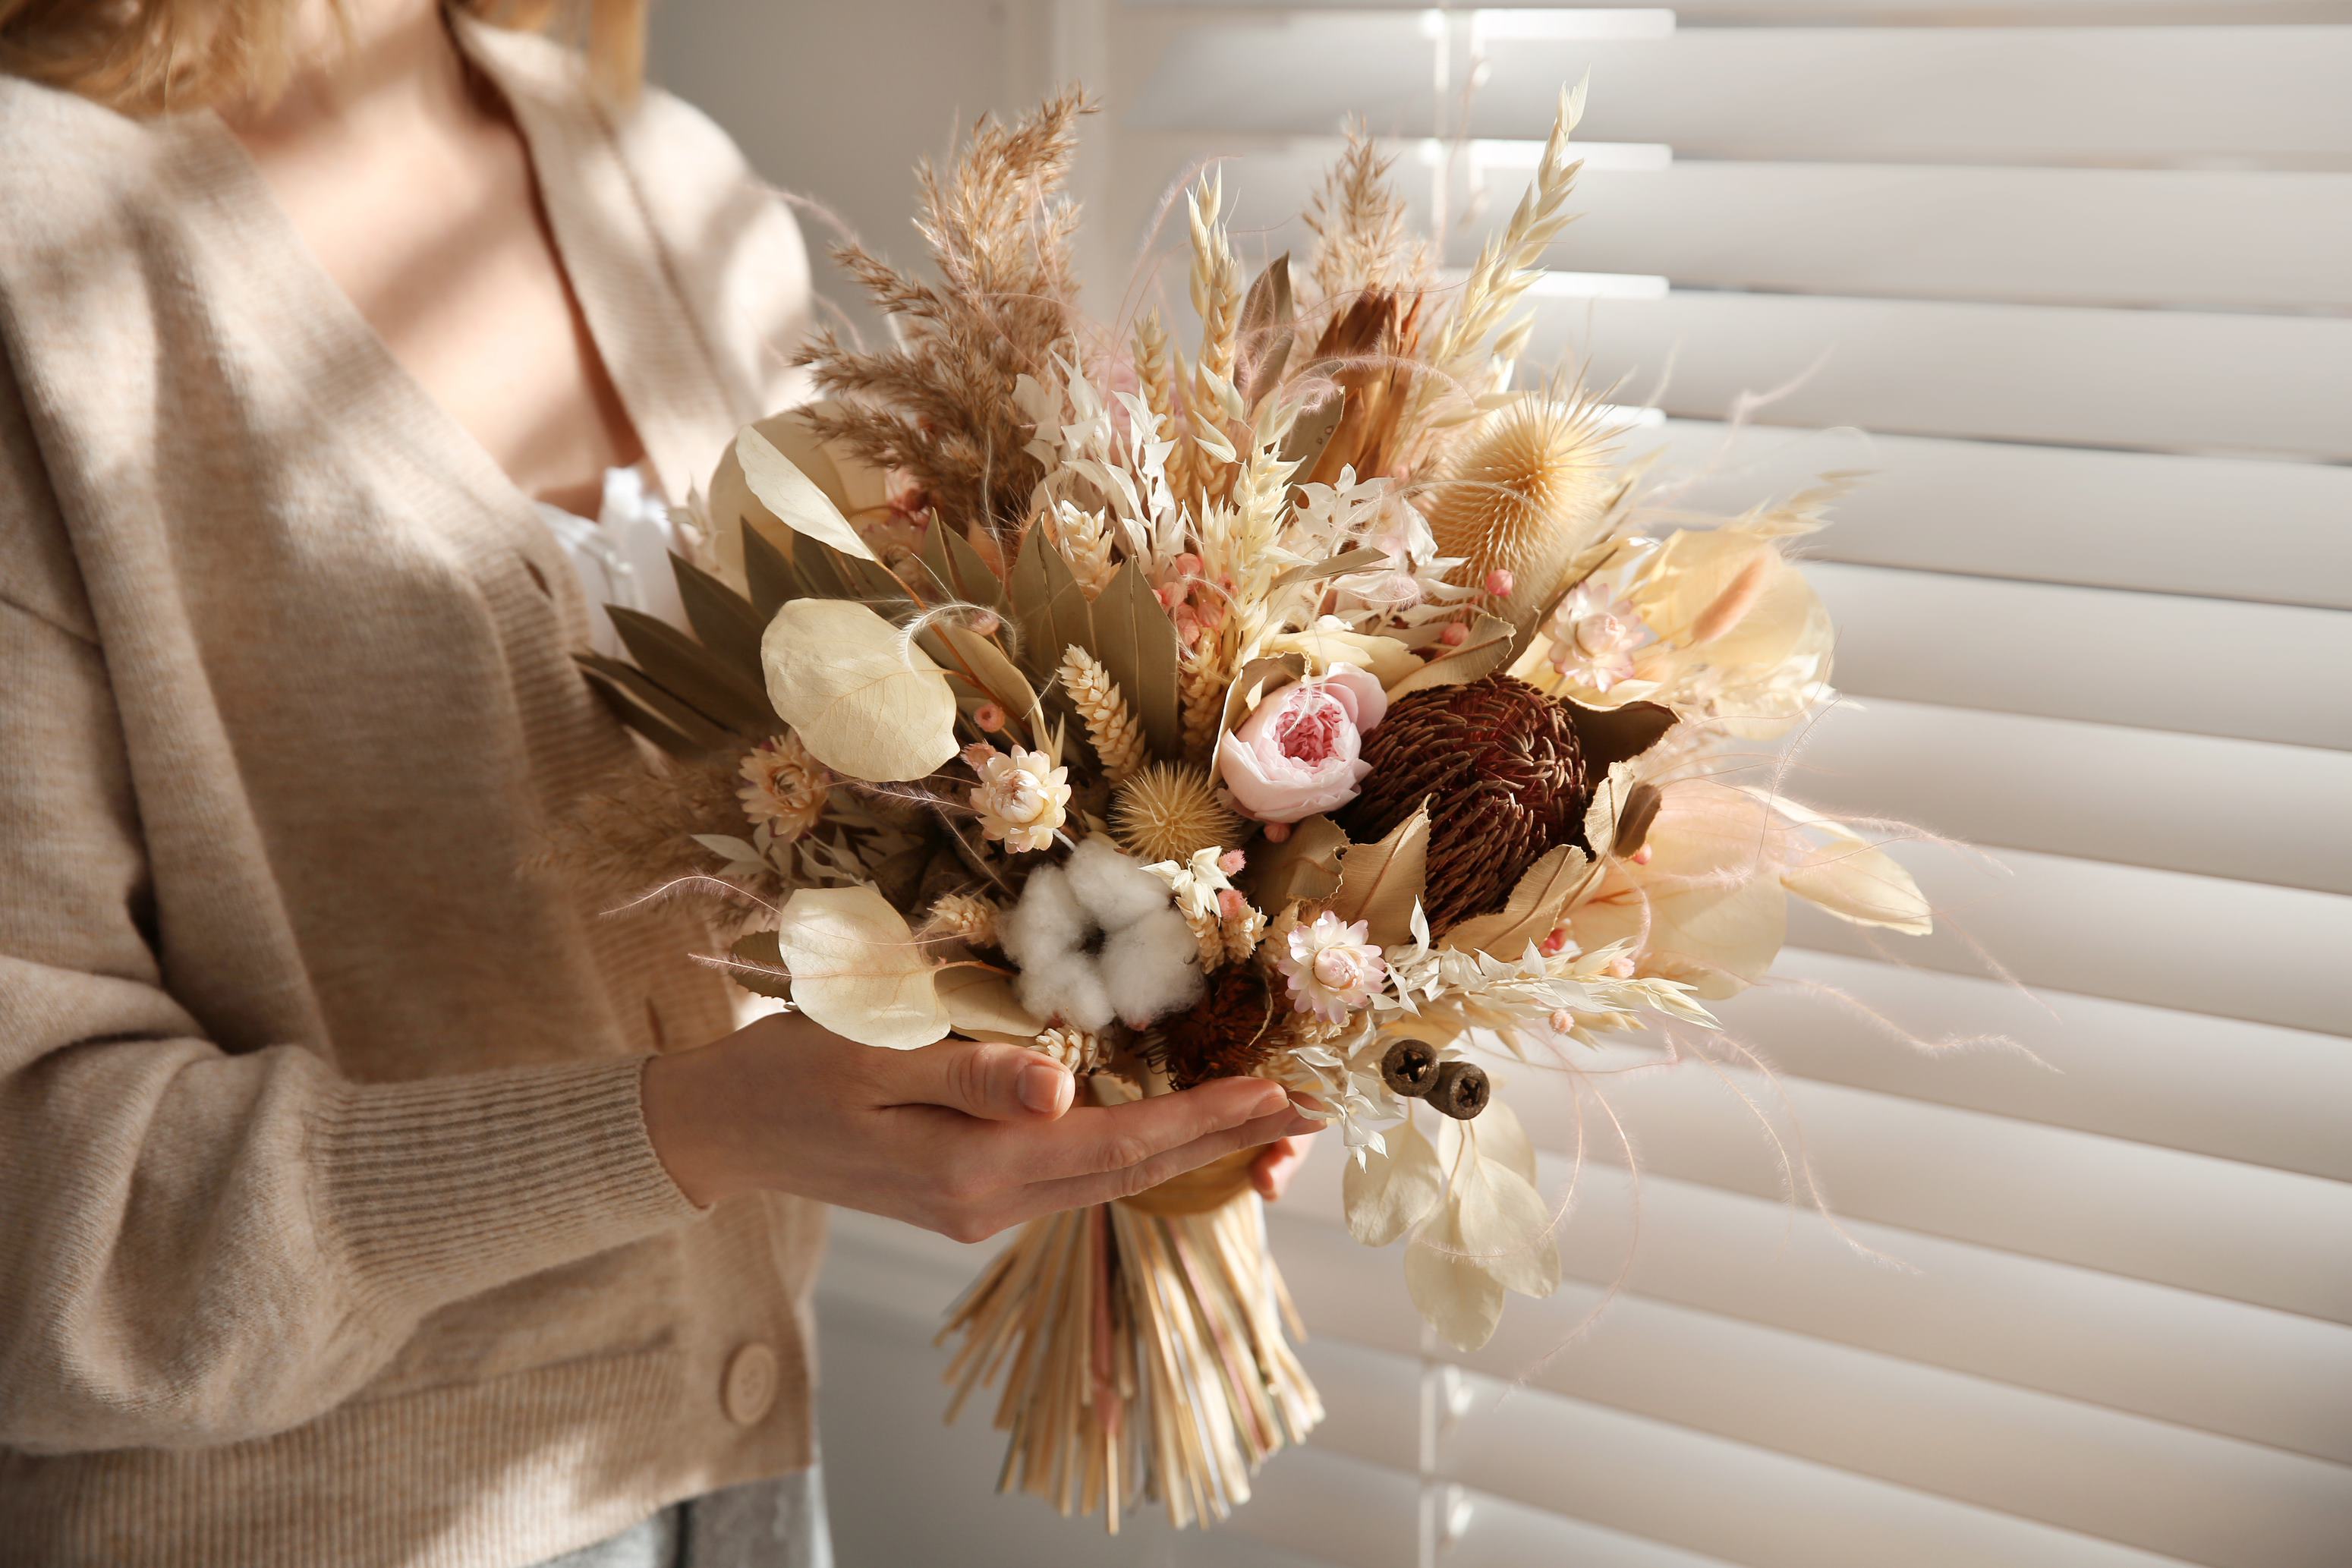 5 Simple Steps to Style Dried Flowers